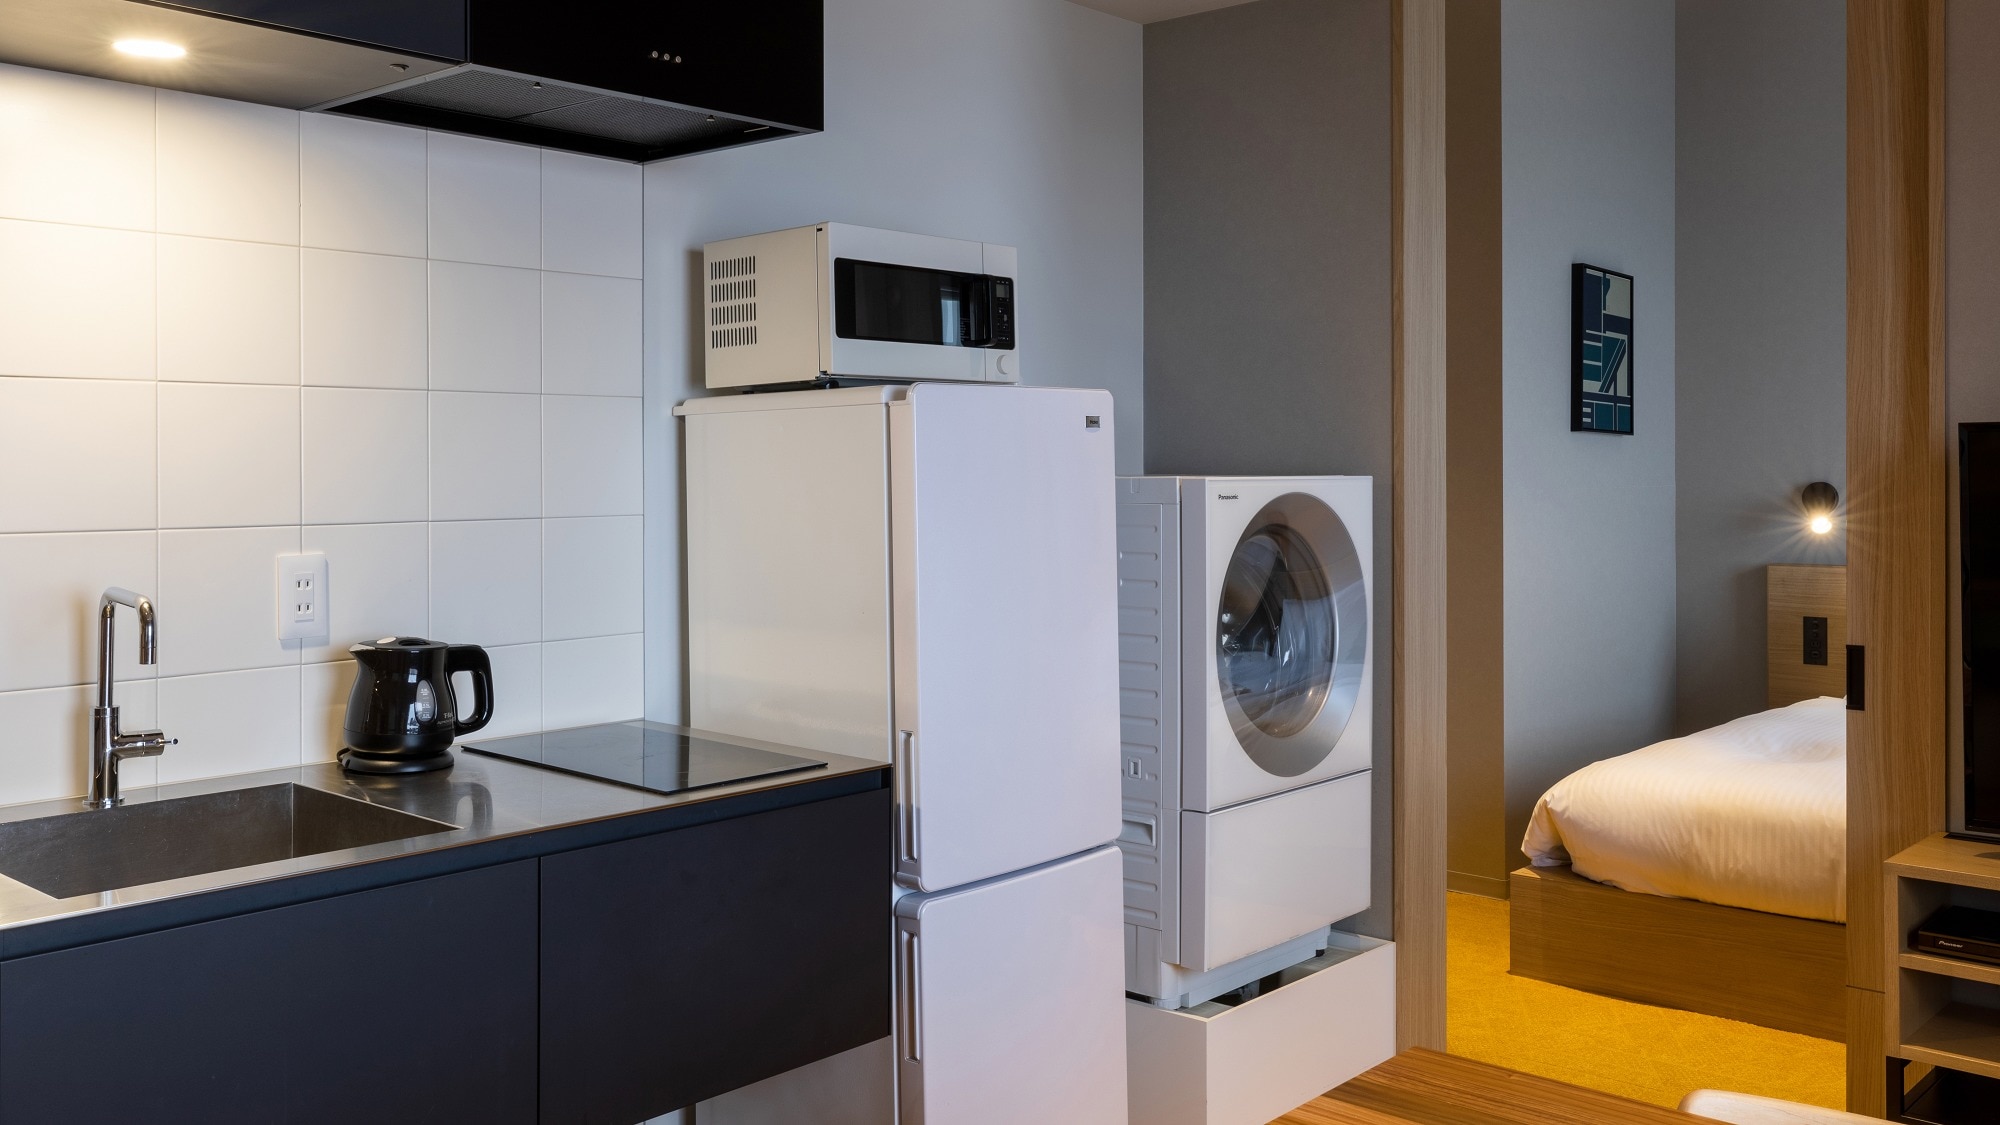 ◆Bunk bedroom｜Equipped with a kitchen, microwave oven, refrigerator, and washing machine.